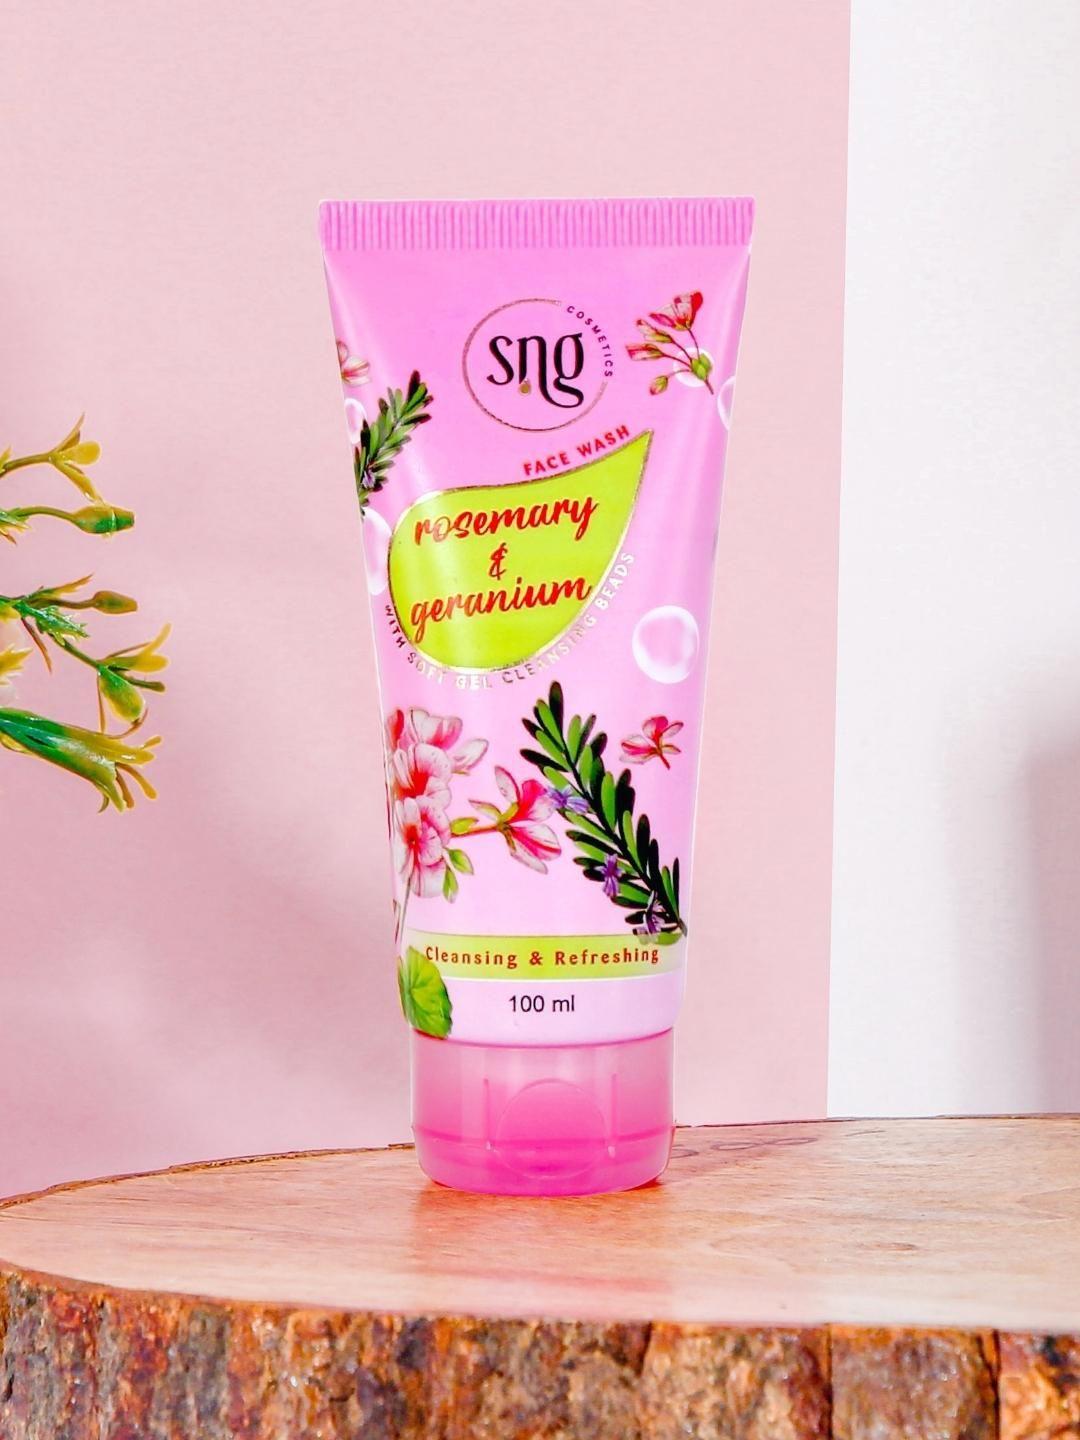 sng cosmetics cleansing & refreshing rosemary & geranium face wash - 100ml